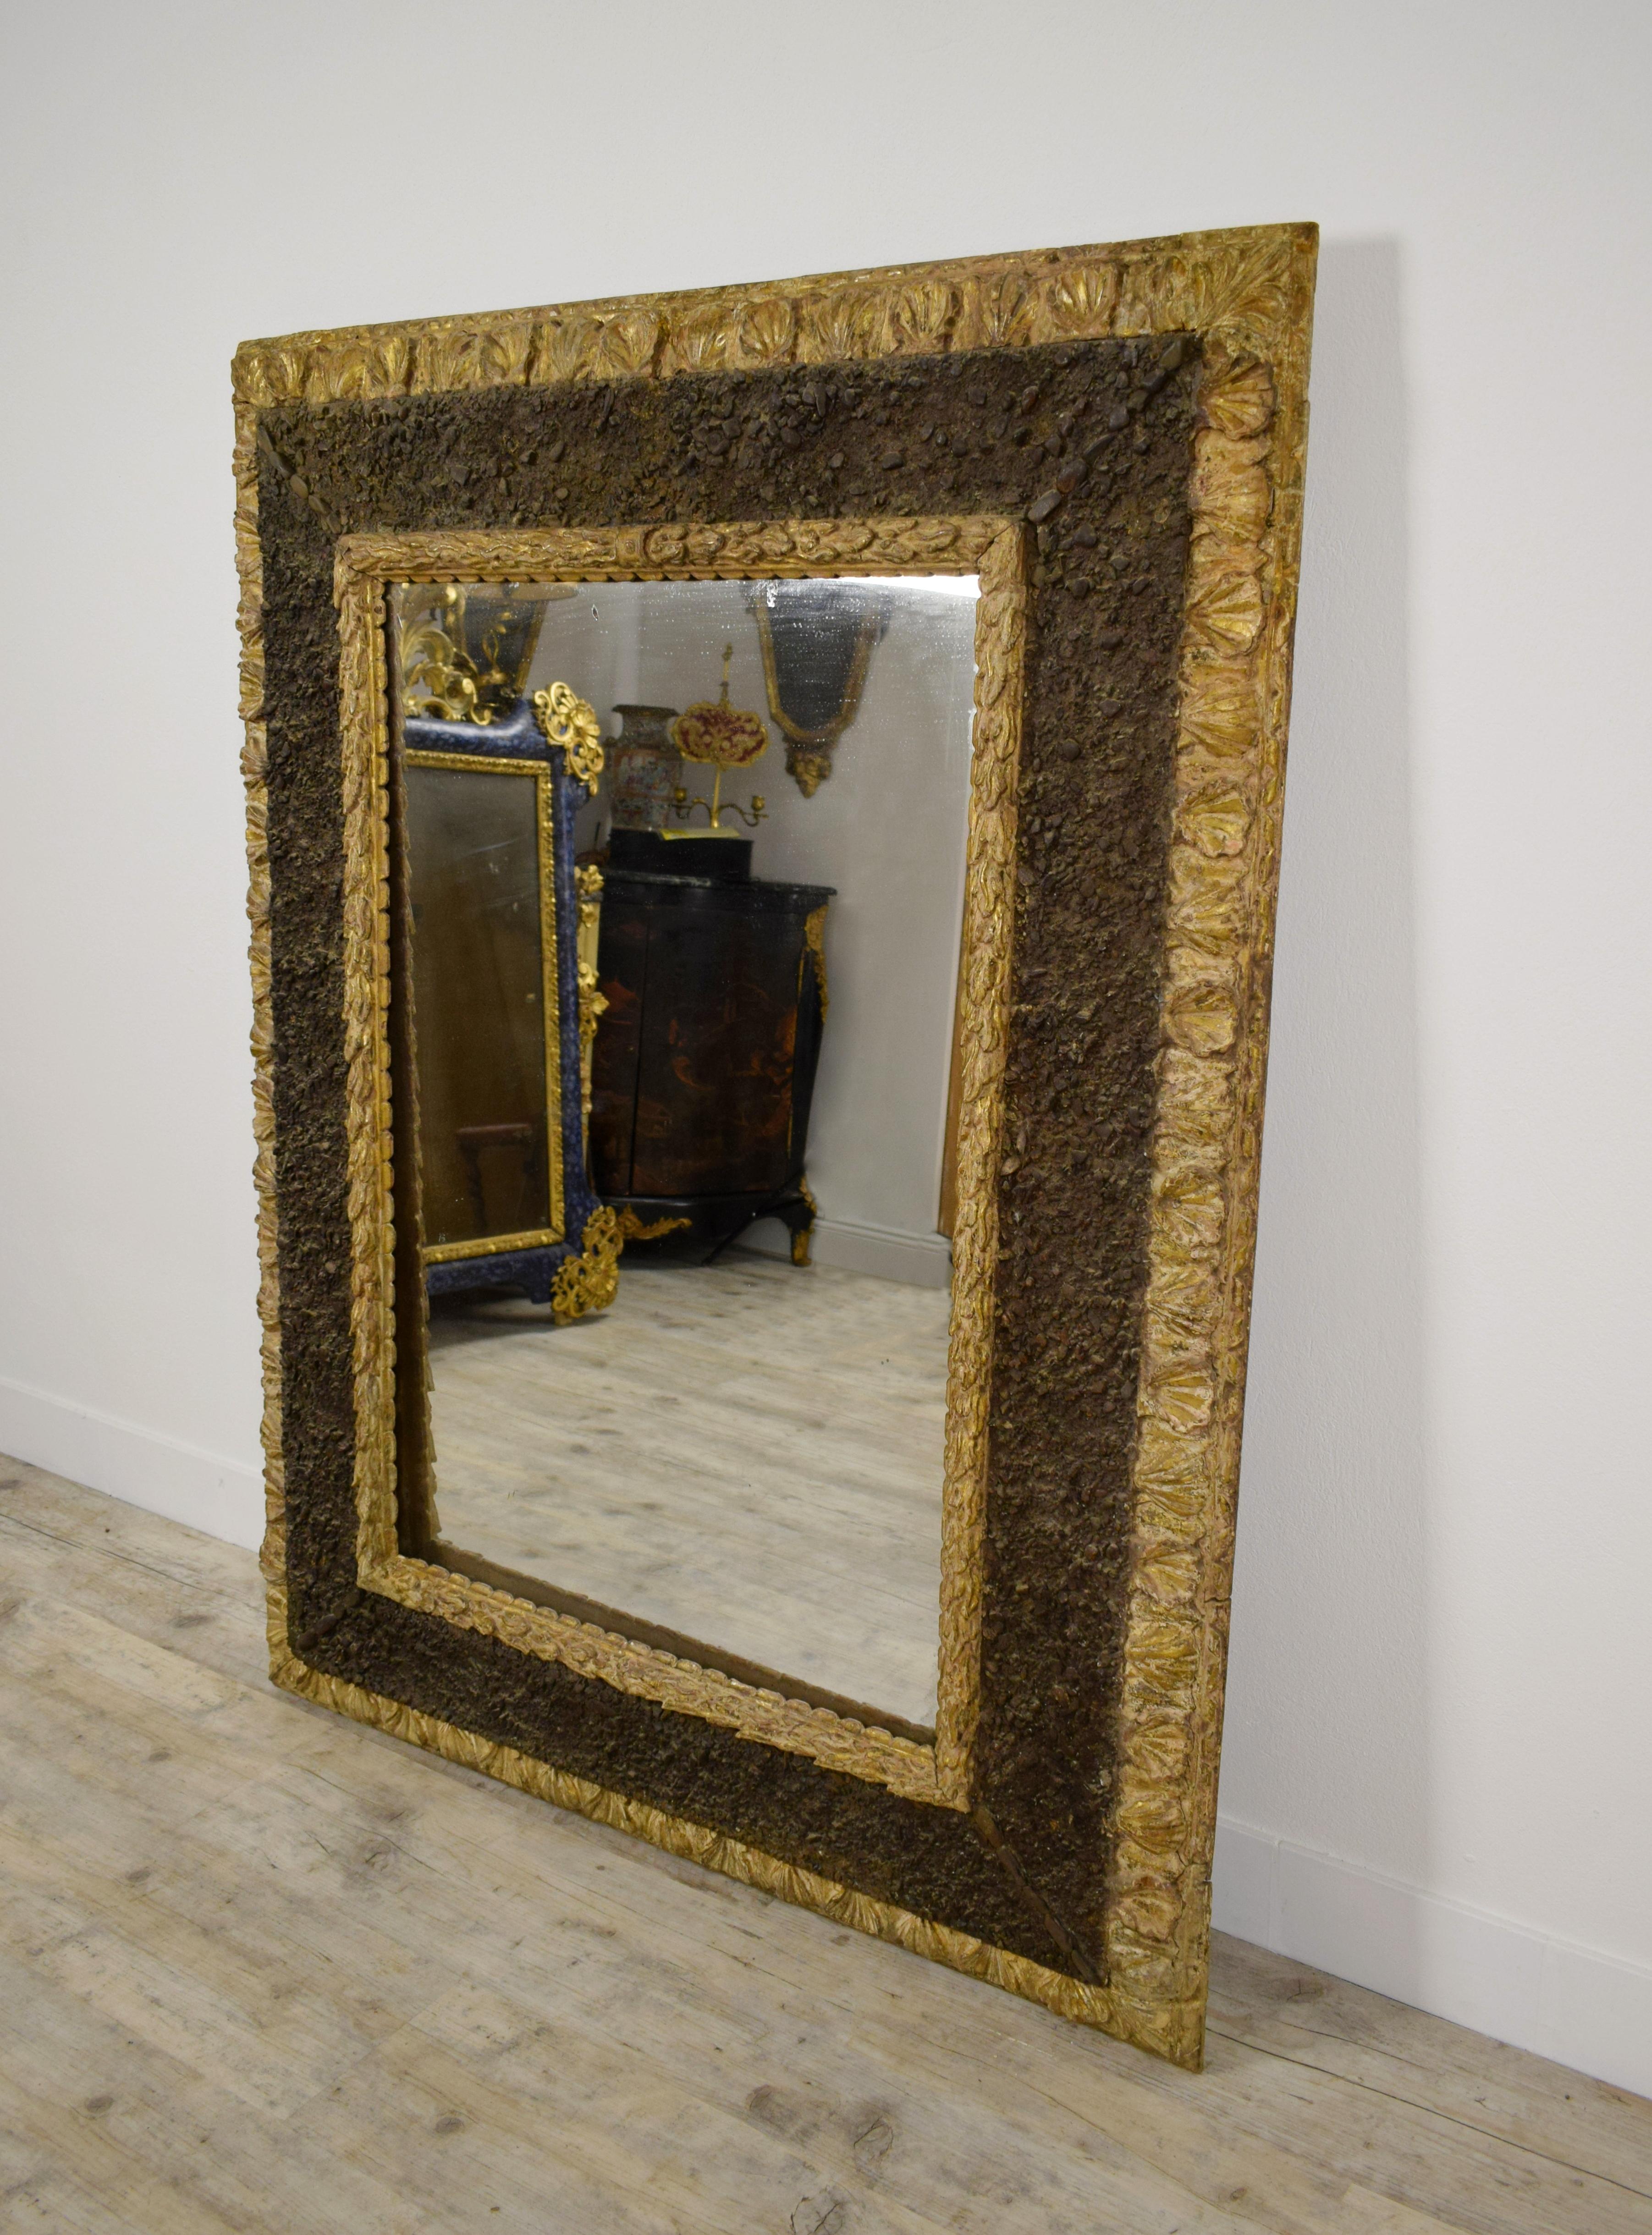 17th century, Italian carved giltwood mirror with small stones

This important mirror, made in Italy in the 17th century, has a rare, if not unique, processing. Rectangular in shape, the wooden frame has three orders of concentric bands. The outer